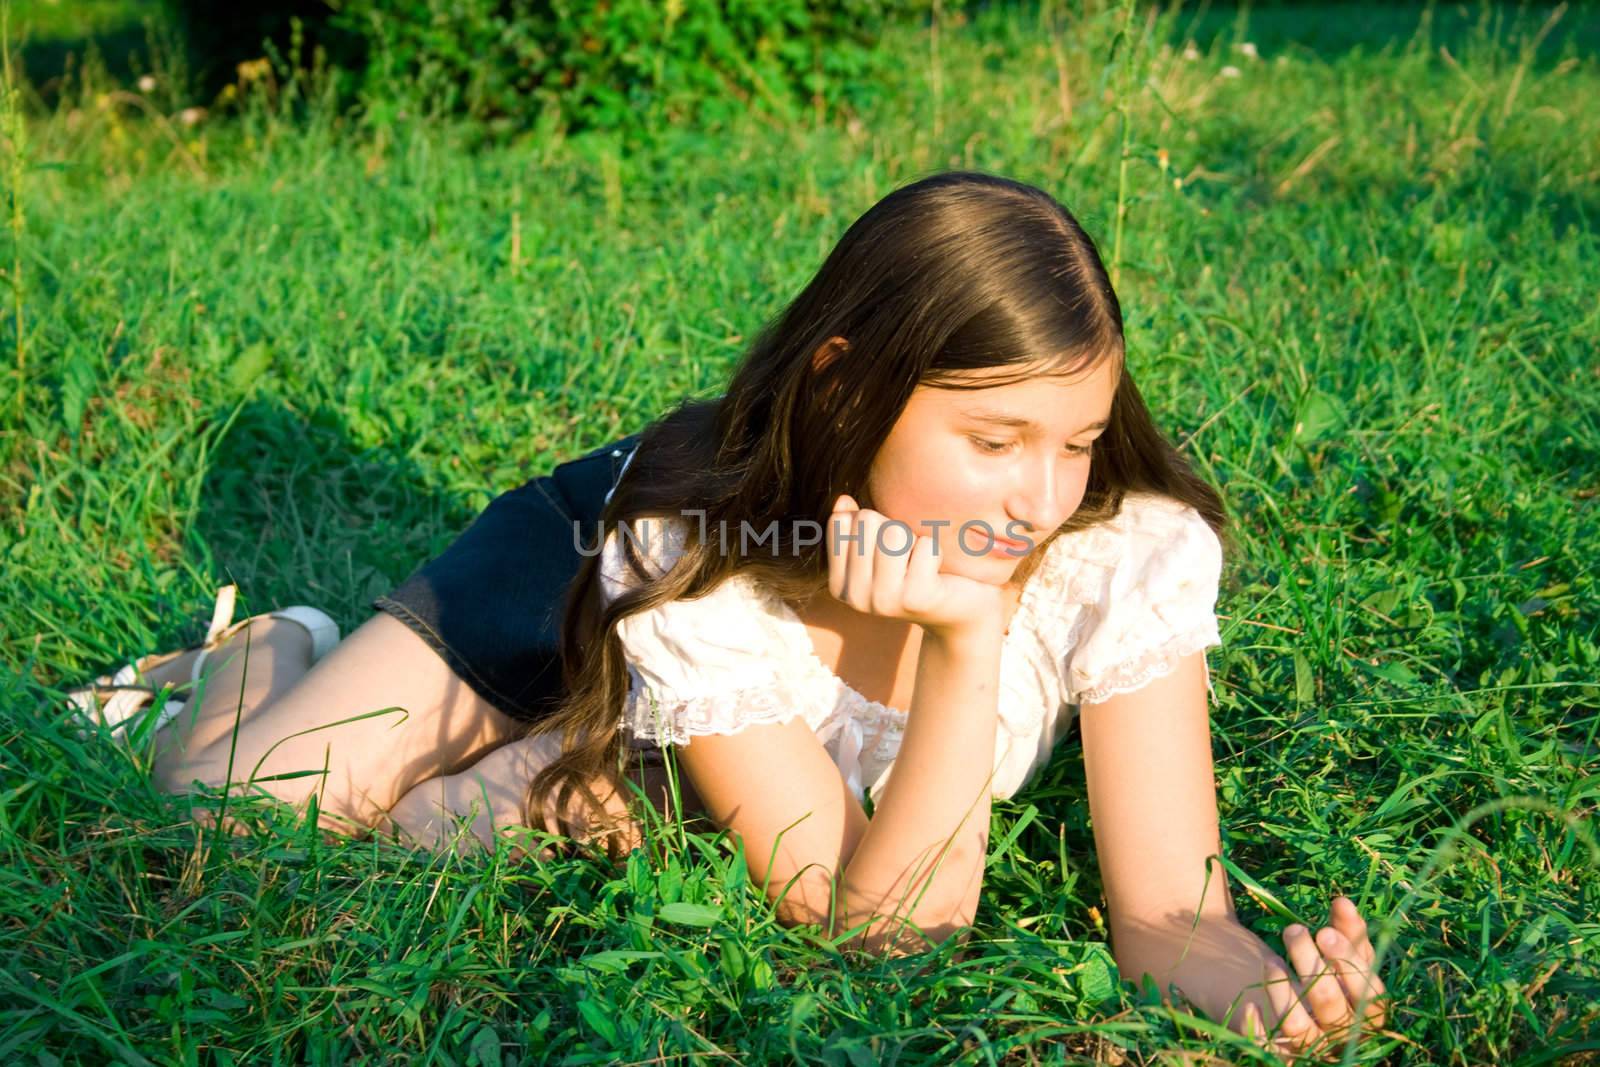 The girl lays on a green grass, thinks and smiles